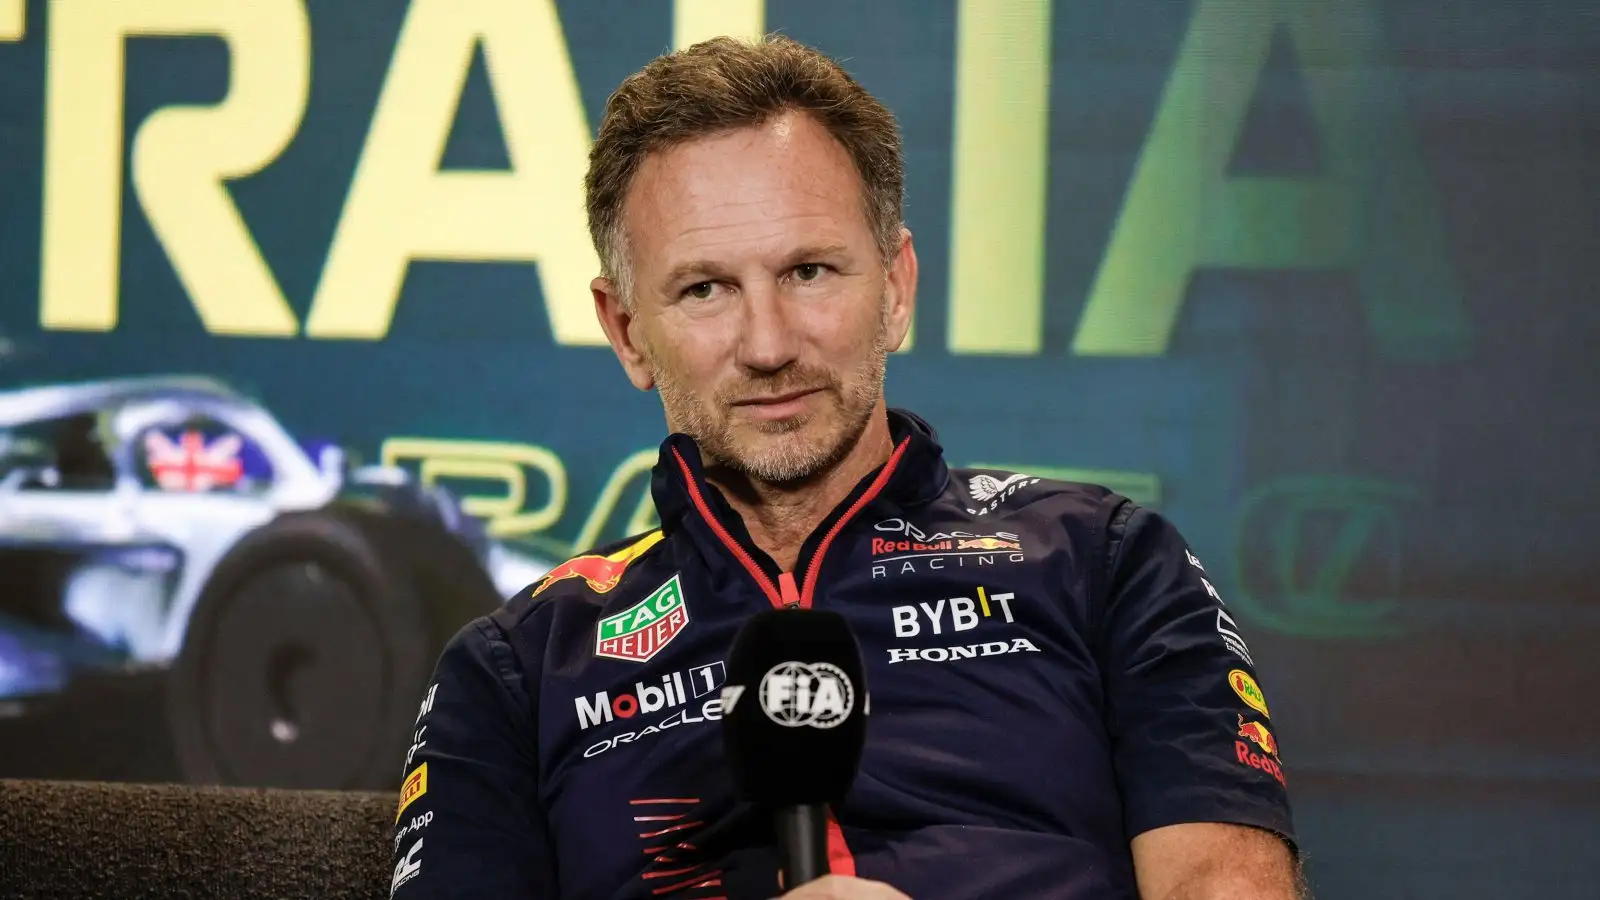 Christian Horner in a press conference. Melbourne, Australia, March 2023.